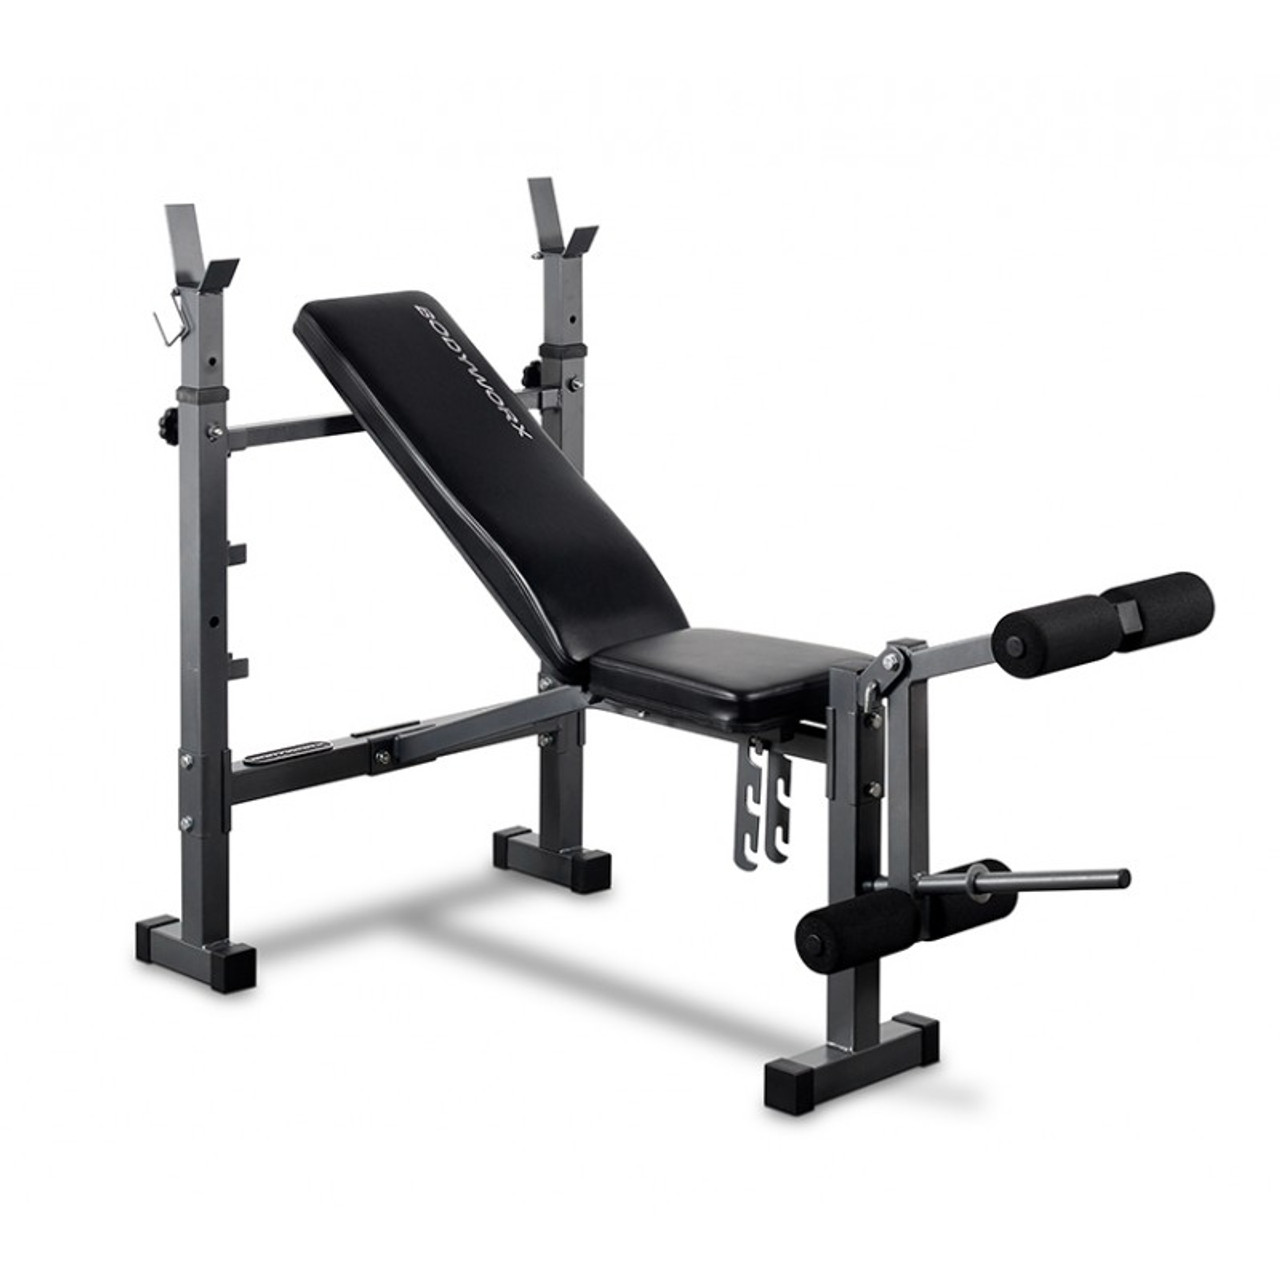 BodyWorx C340STB Basic weight bench - Official Store - Guaranteed Delivery